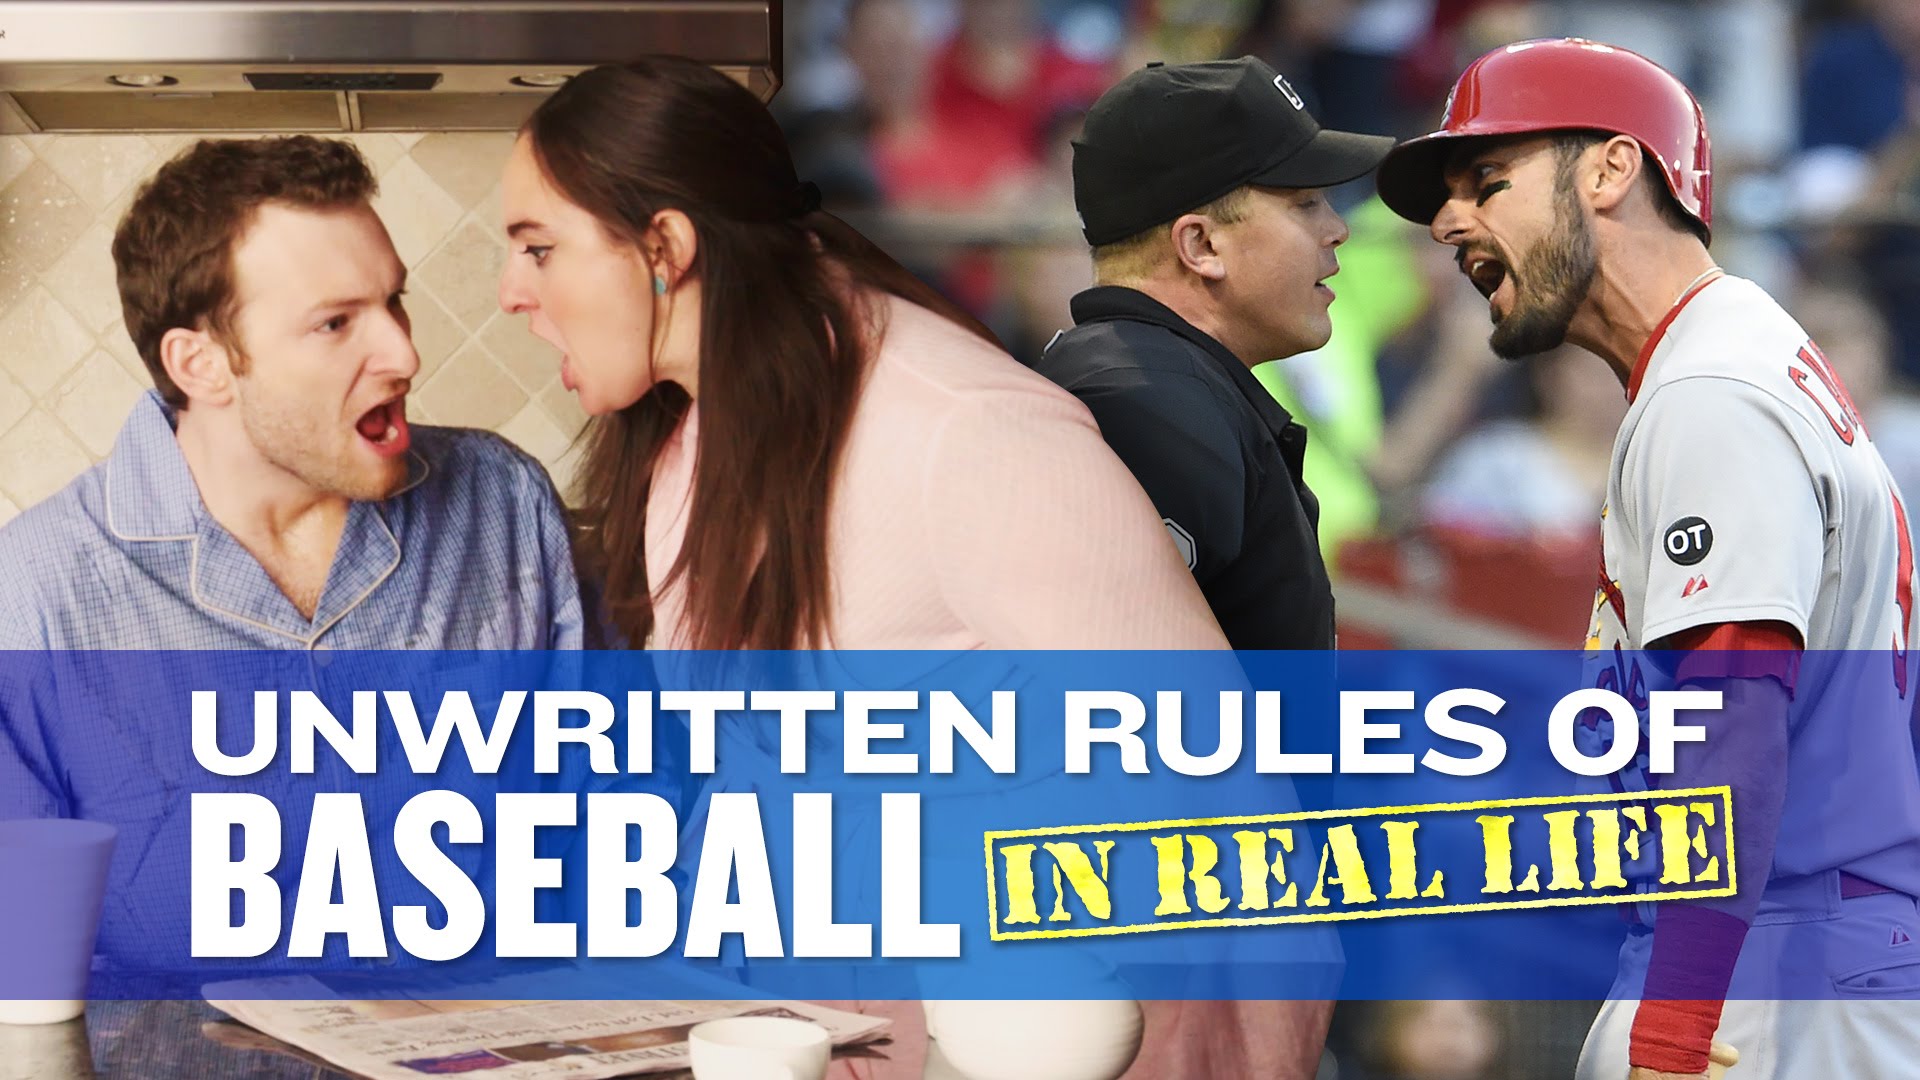 The Unwritten Rules of Baseball in Real Life